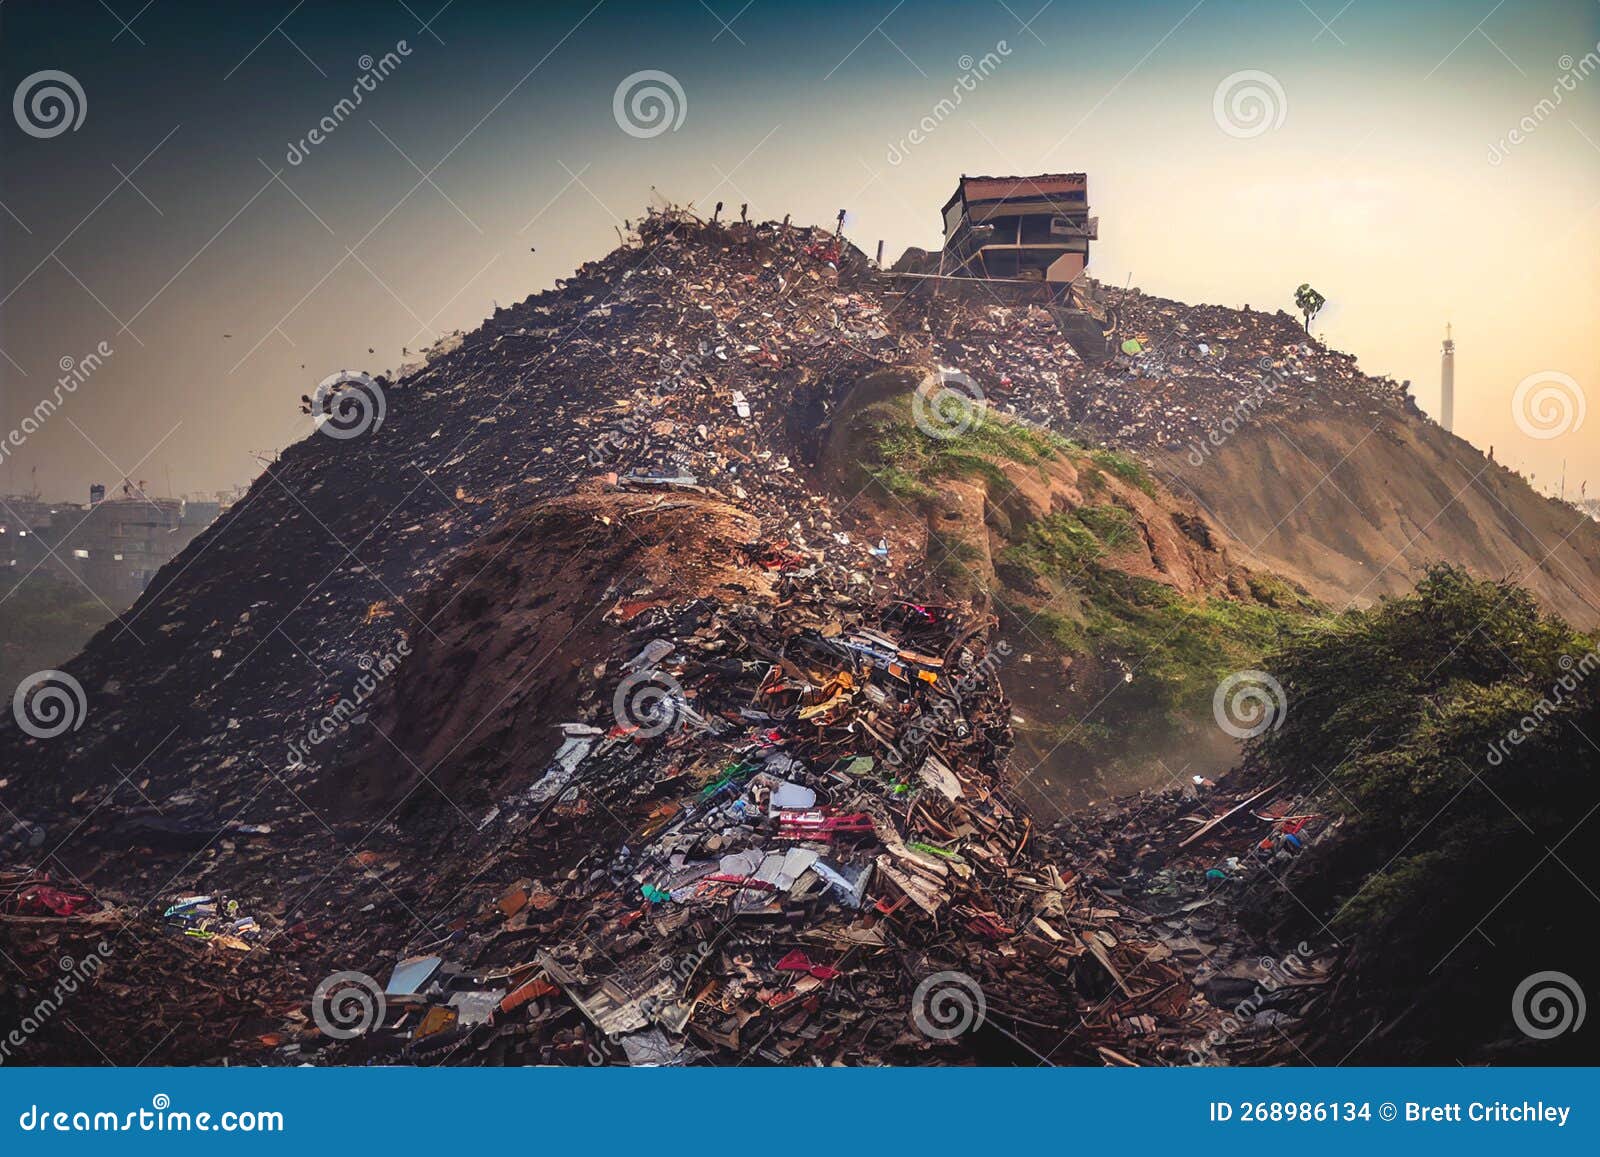 garbage piled high in poor over populated country